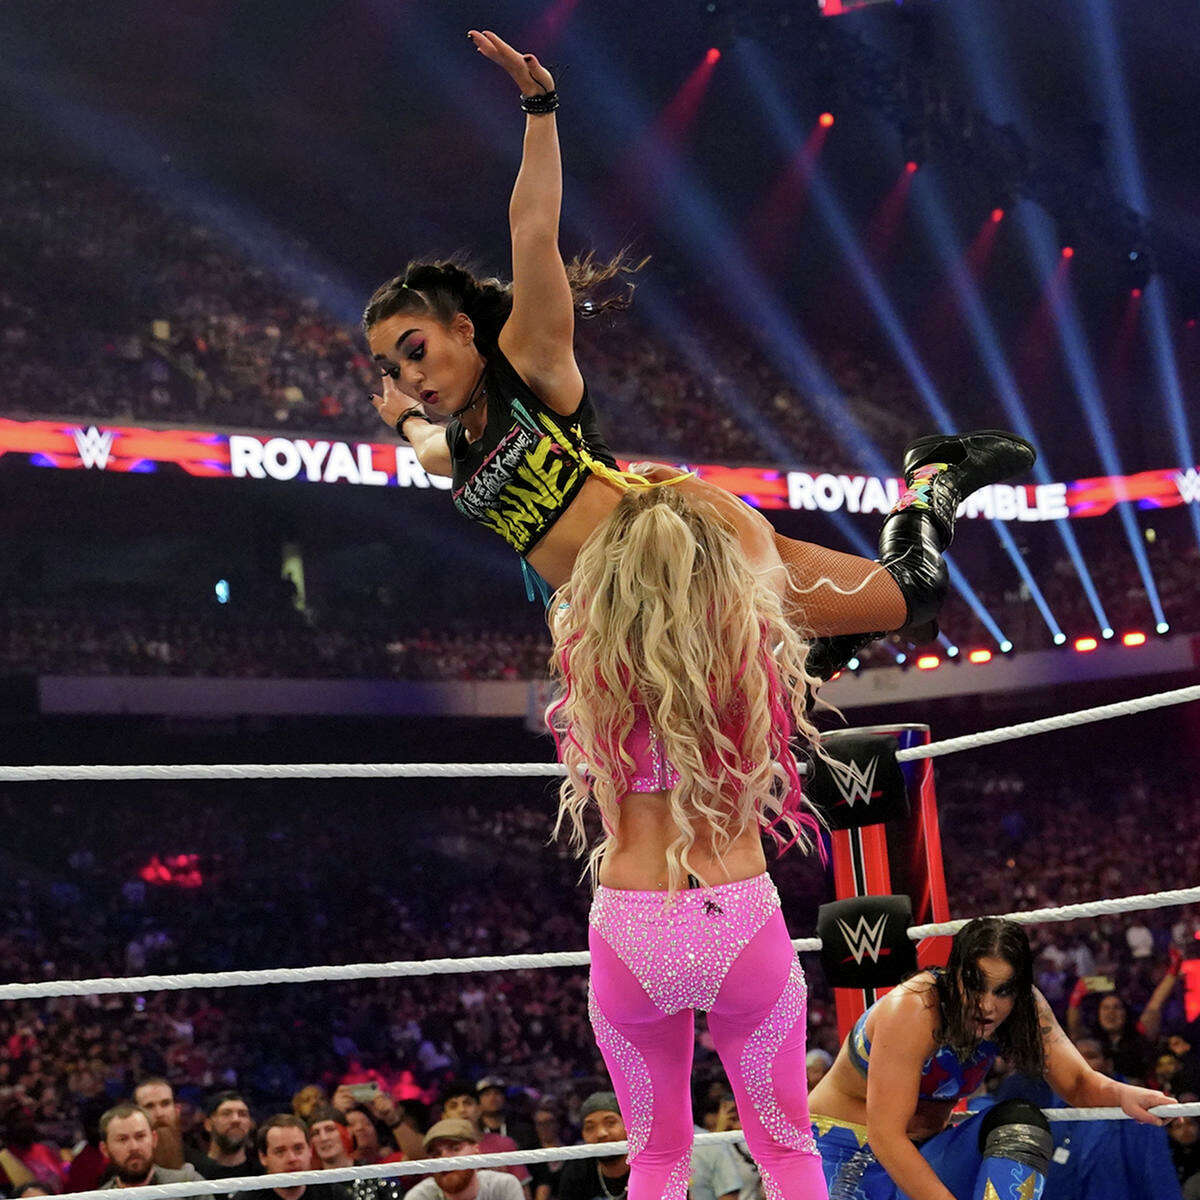 Laredo's Roxanne Perez made her WWE main roster pay-per-view debut at the Royal Rumble on Saturday, Jan. 28, 2023 in San Antonio, Texas.